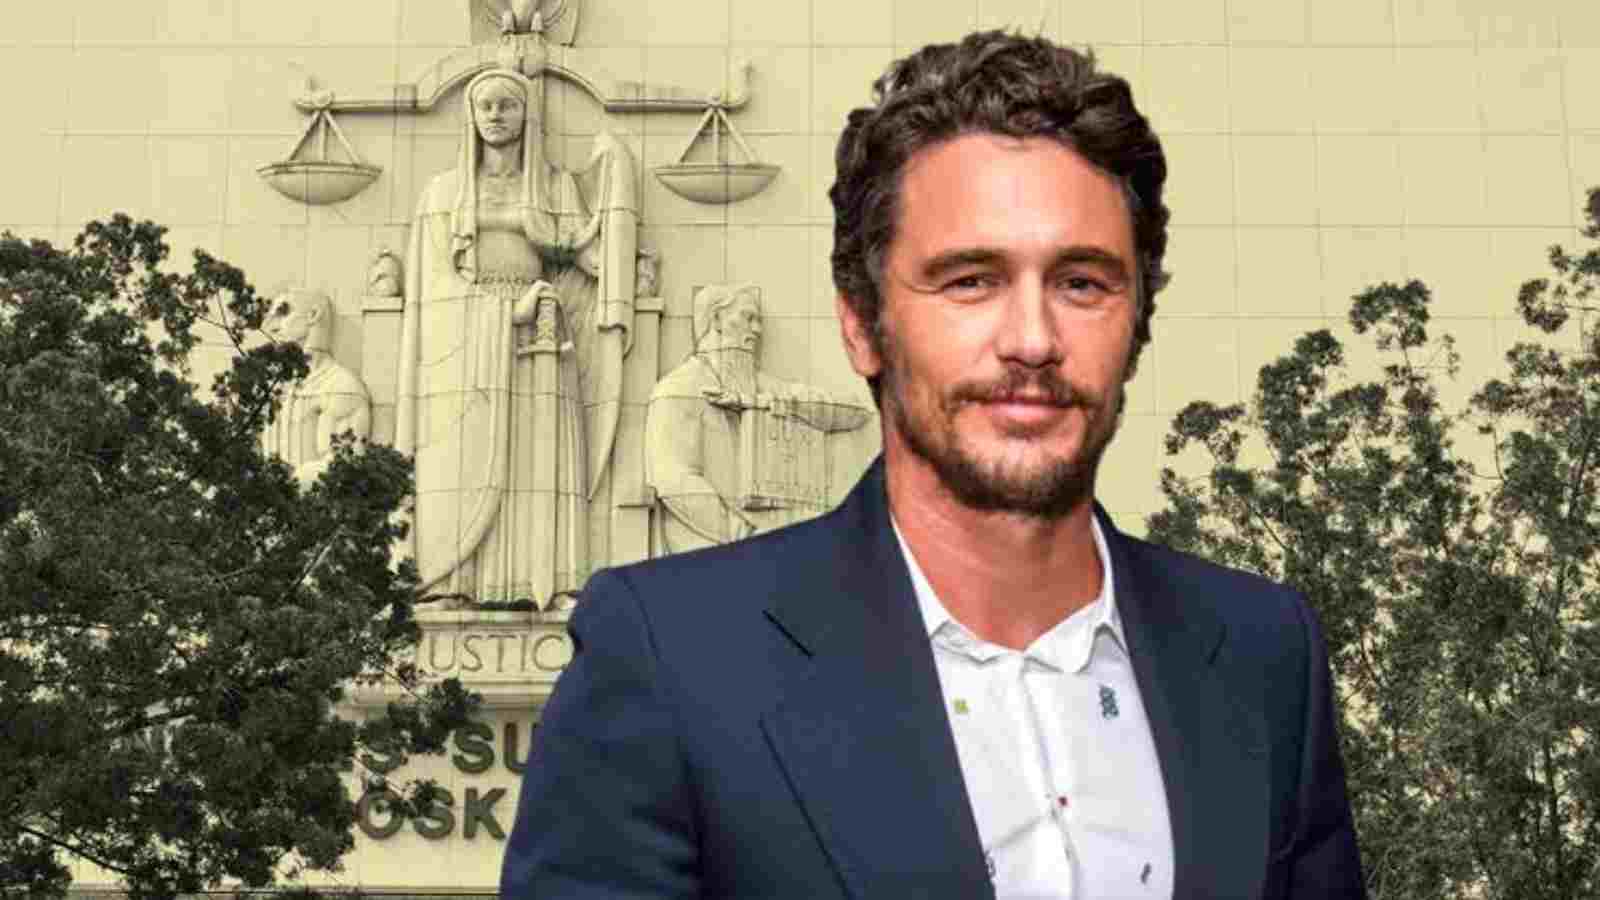 James Franco Returns To Acting After Sexual Misconduct Allegations